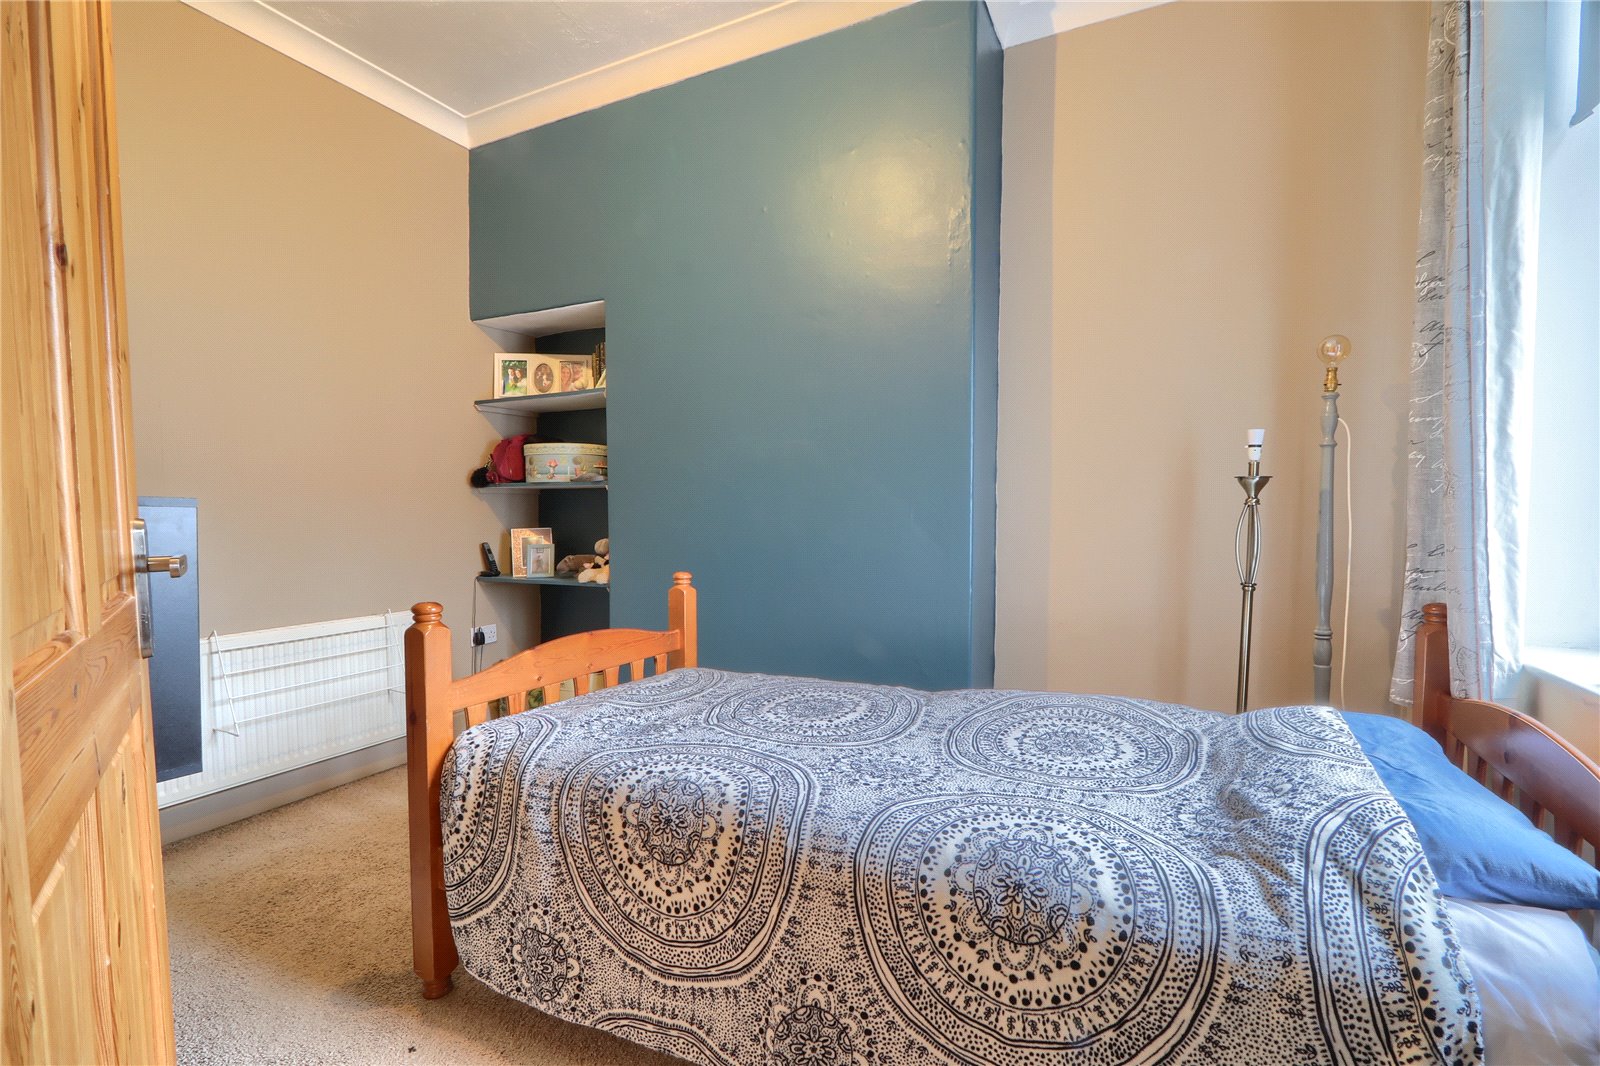 2 bed house for sale in Arlington Street, Stockton-on-Tees  - Property Image 7